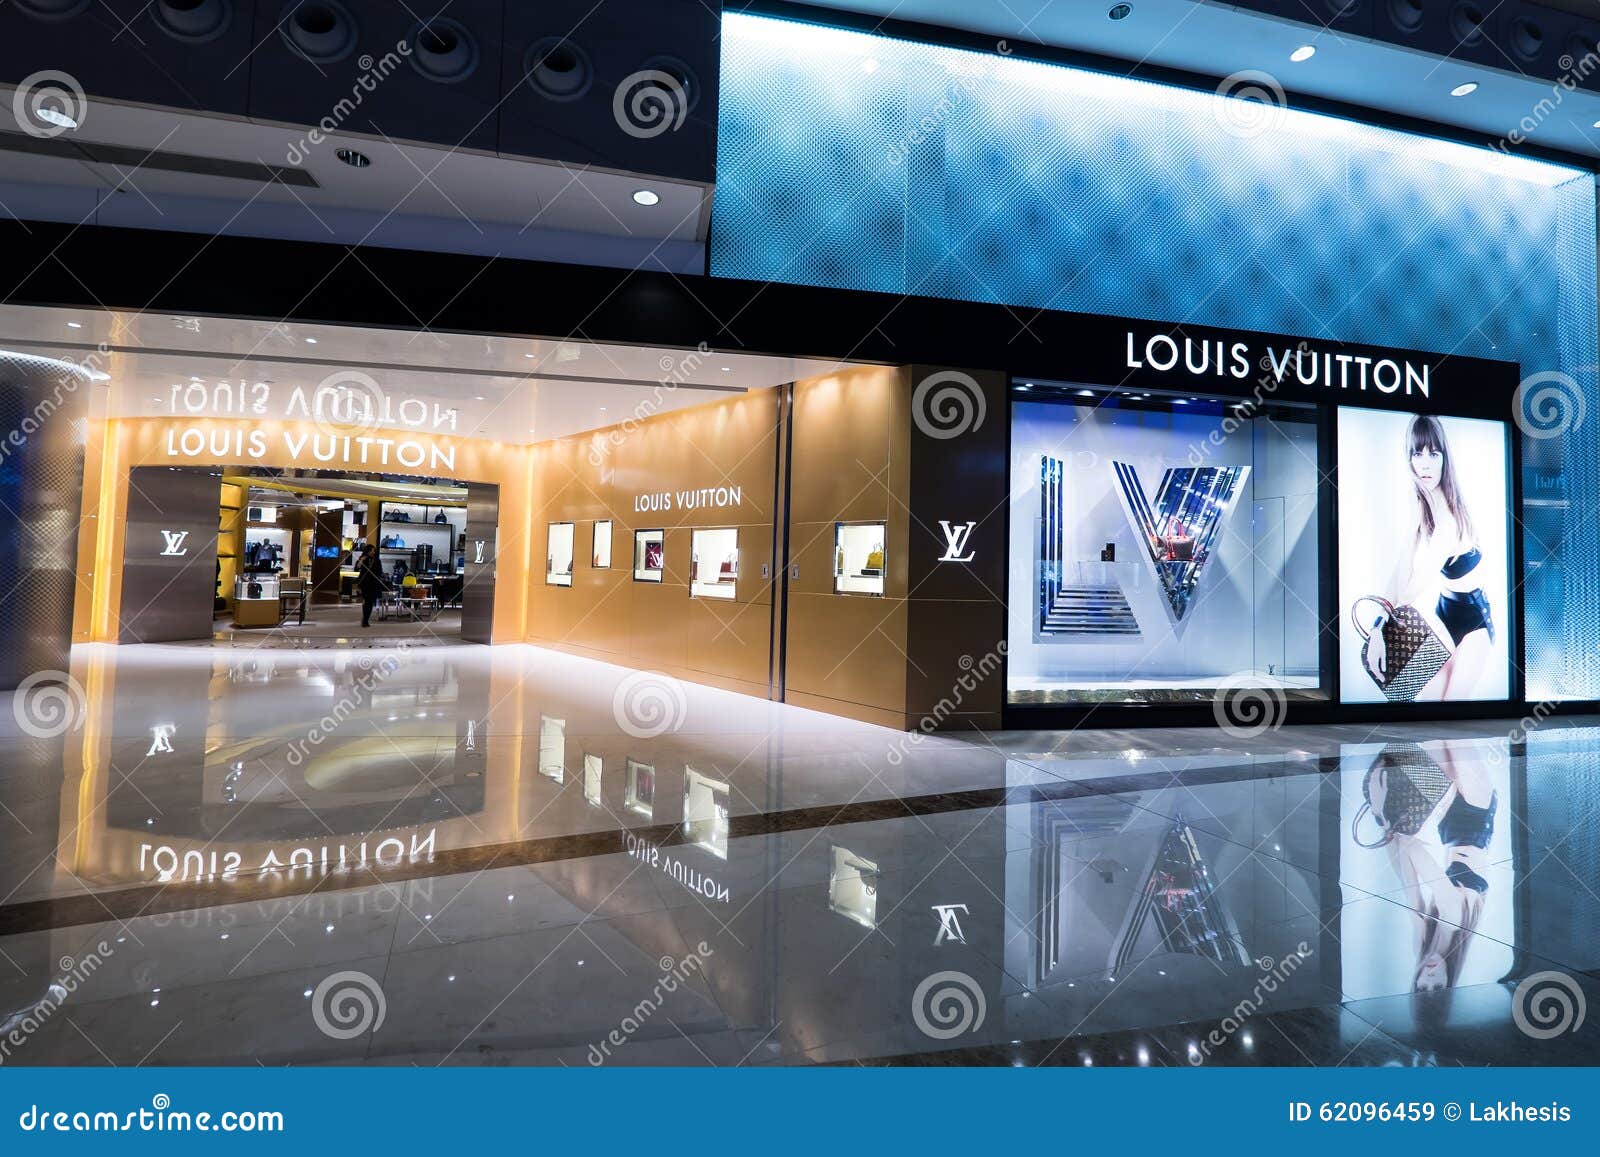 Inside View of the Store Louis Vuitton Editorial Stock Image